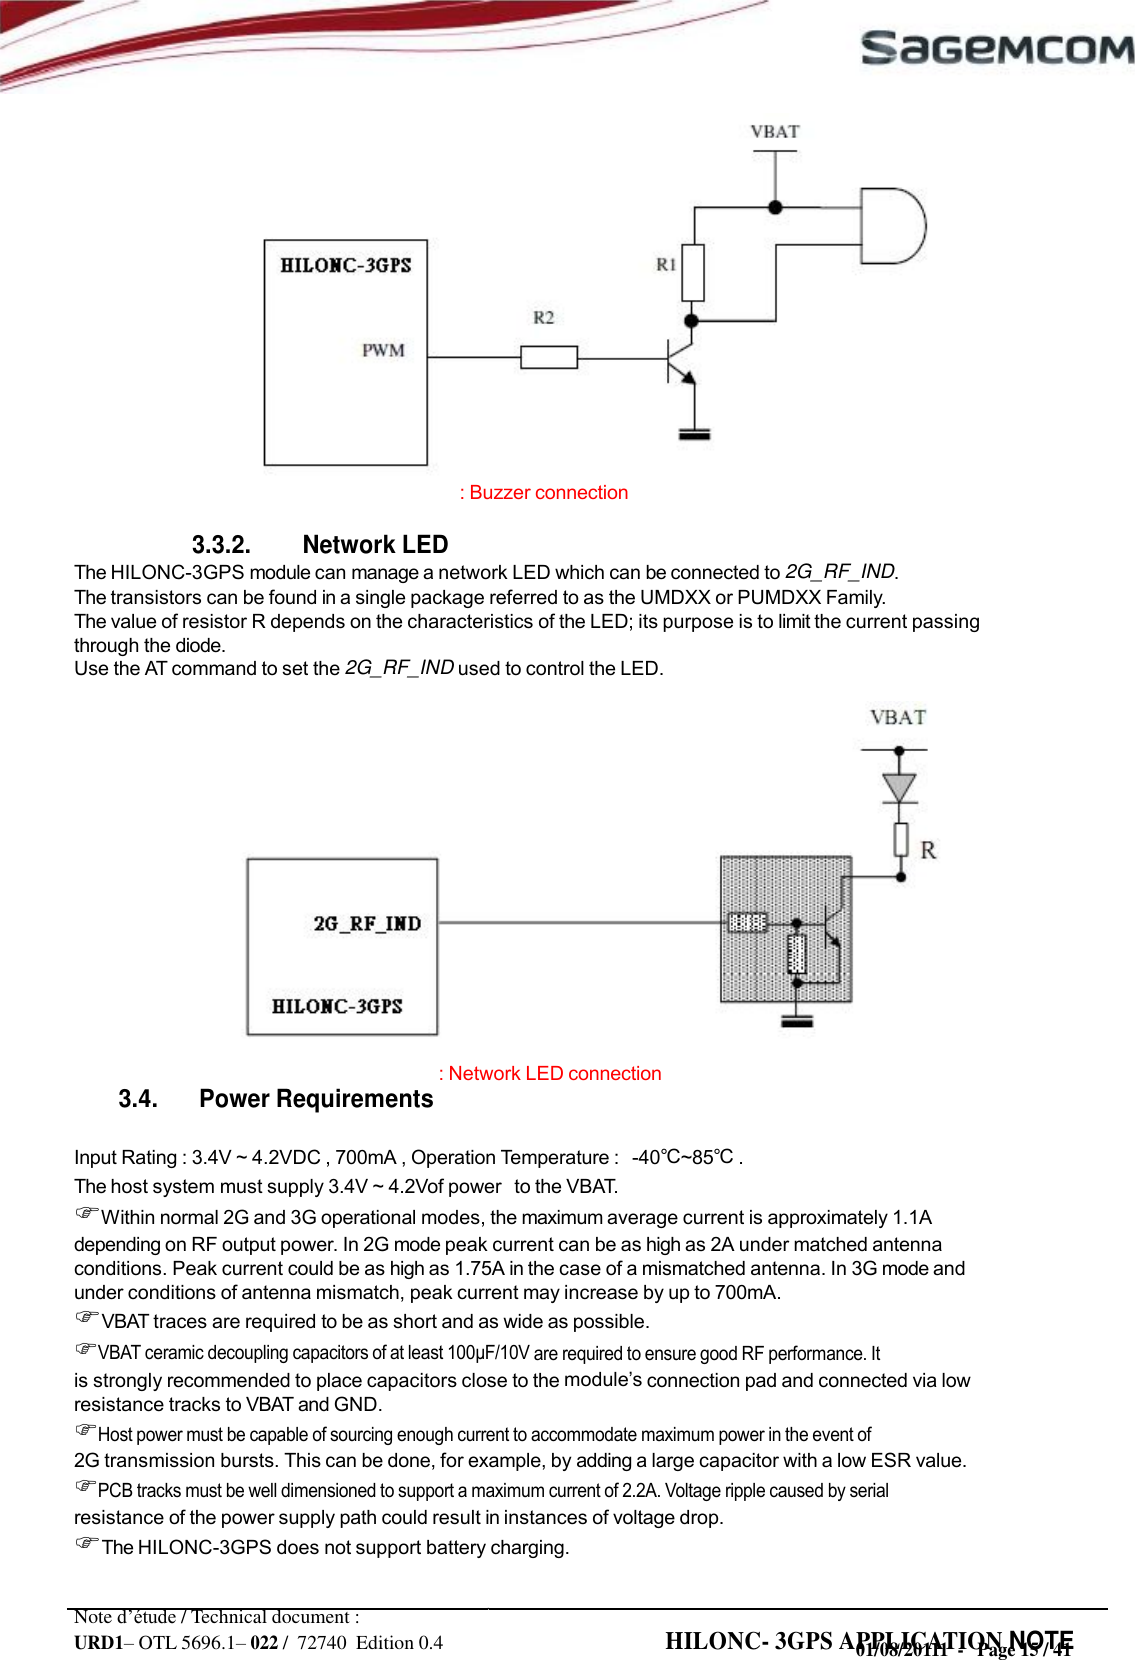 URD1– OTL 5696.1– 022 /  72740  Edition 0.4 HILONC- 3GPS APPLICATION NOTE                     : Buzzer connection  3.3.2. Network LED The HILONC-3GPS module can manage a network LED which can be connected to 2G_RF_IND. The transistors can be found in a single package referred to as the UMDXX or PUMDXX Family. The value of resistor R depends on the characteristics of the LED; its purpose is to limit the current passing through the diode. Use the AT command to set the 2G_RF_IND used to control the LED.                : Network LED connection 3.4. Power Requirements  Input Rating : 3.4V ~ 4.2VDC , 700mA , Operation Temperature :   -40℃~85℃ . The host system must supply 3.4V ~ 4.2Vof power   to the VBAT. Within normal 2G and 3G operational modes, the maximum average current is approximately 1.1A depending on RF output power. In 2G mode peak current can be as high as 2A under matched antenna conditions. Peak current could be as high as 1.75A in the case of a mismatched antenna. In 3G mode and under conditions of antenna mismatch, peak current may increase by up to 700mA. VBAT traces are required to be as short and as wide as possible. VBAT ceramic decoupling capacitors of at least  are required to ensure good RF performance. It is strongly recommended to place capacitors close to the  connection pad and connected via low resistance tracks to VBAT and GND. Host power must be capable of sourcing enough current to accommodate maximum power in the event of 2G transmission bursts. This can be done, for example, by adding a large capacitor with a low ESR value. PCB tracks must be well dimensioned to support a maximum current of 2.2A. Voltage ripple caused by serial resistance of the power supply path could result in instances of voltage drop. The HILONC-3GPS does not support battery charging.  Note d’étude / Technical document : 01/08/20111  -   Page 15 / 41